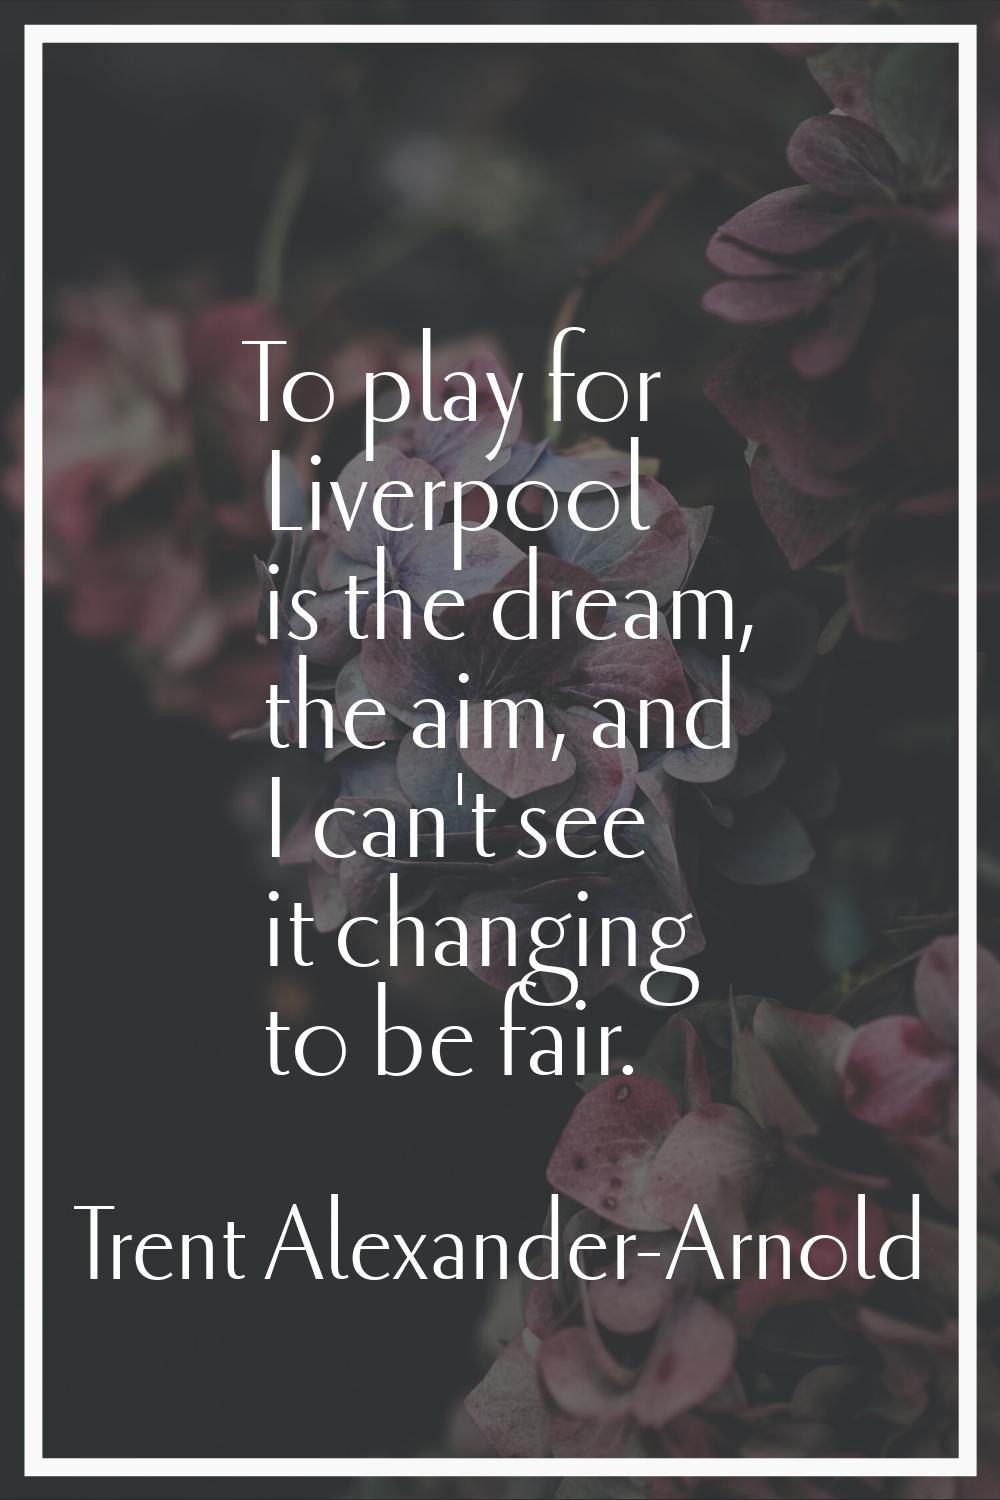 To play for Liverpool is the dream, the aim, and I can't see it changing to be fair.